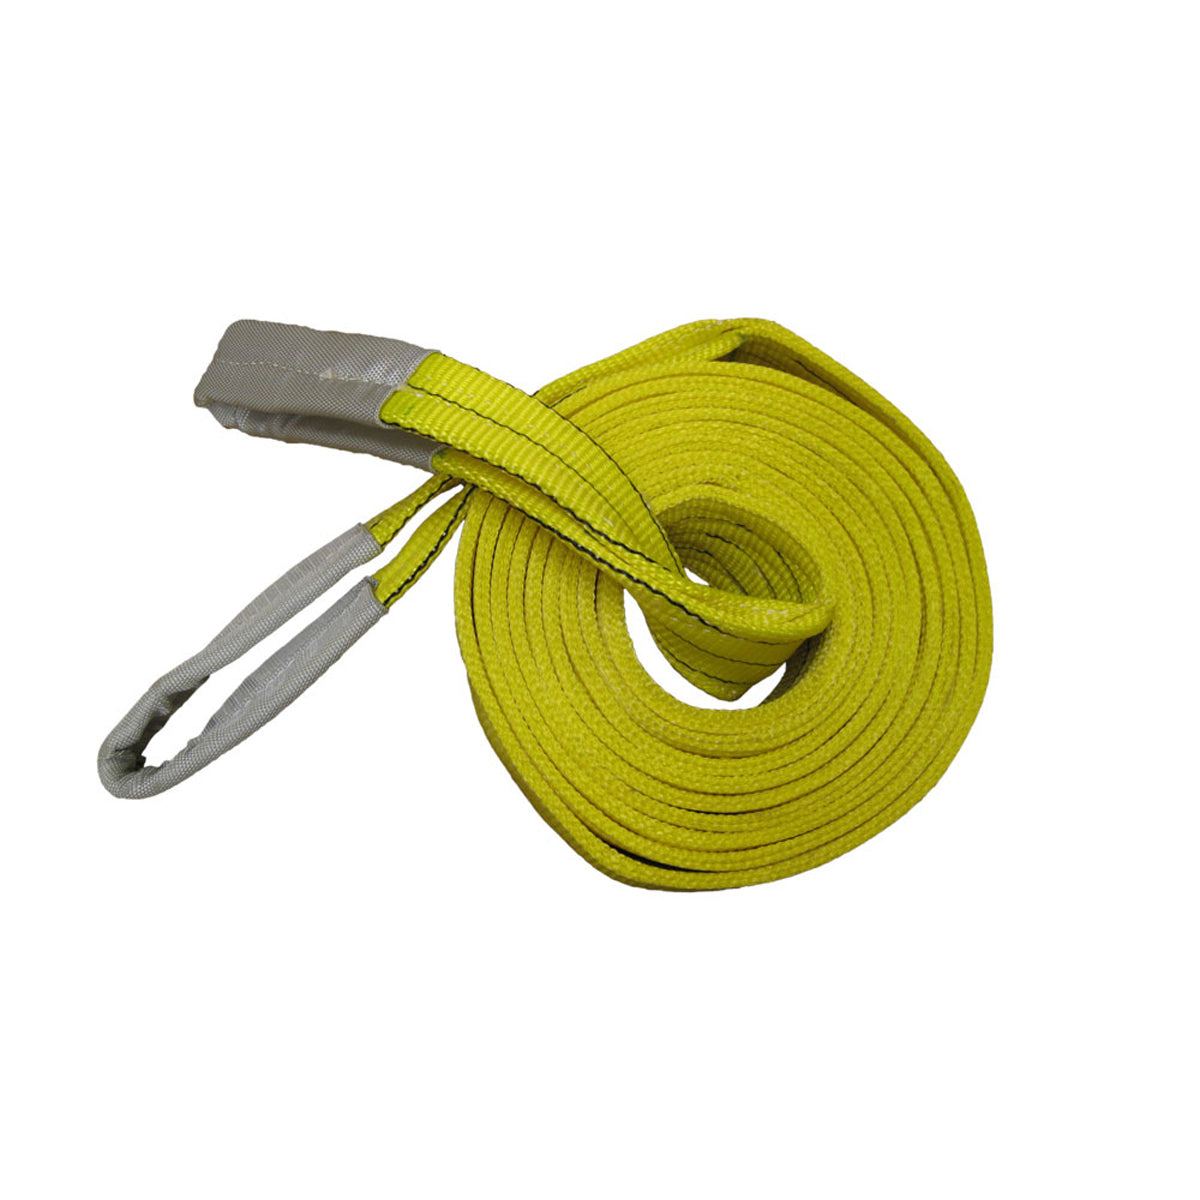 Horntools recovery strap 6 m, 3t WLL, 21t BL